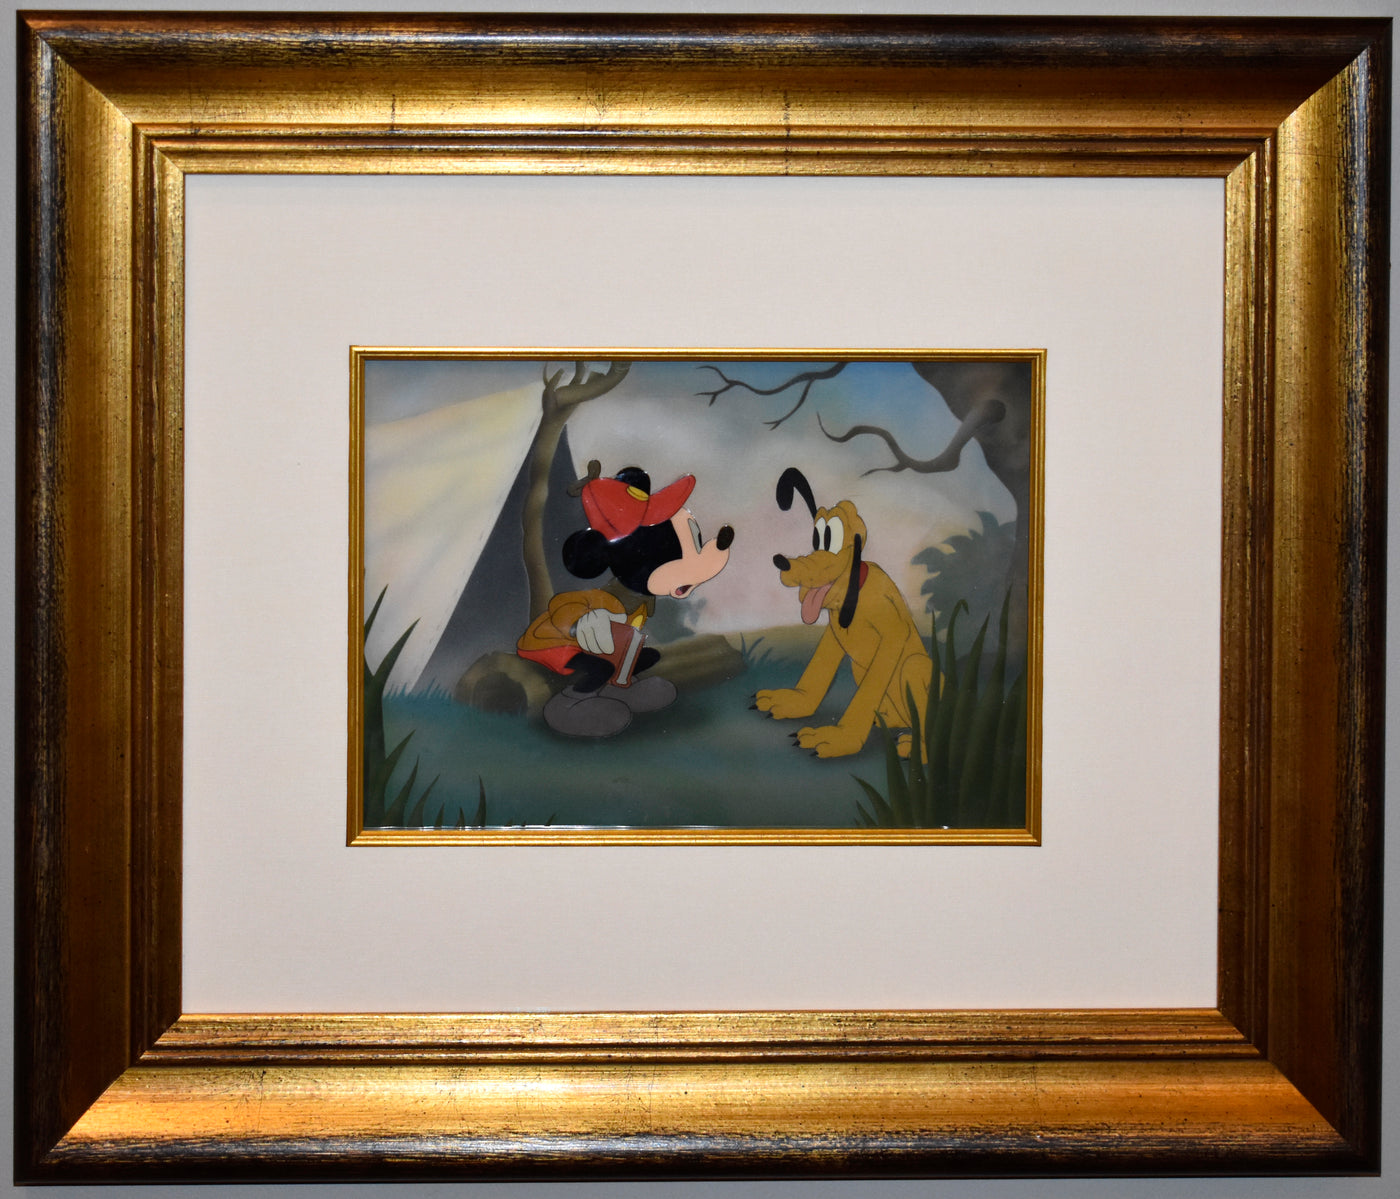 Original Walt Disney Production Cel on Courvoisier Background from The Pointer (1939)